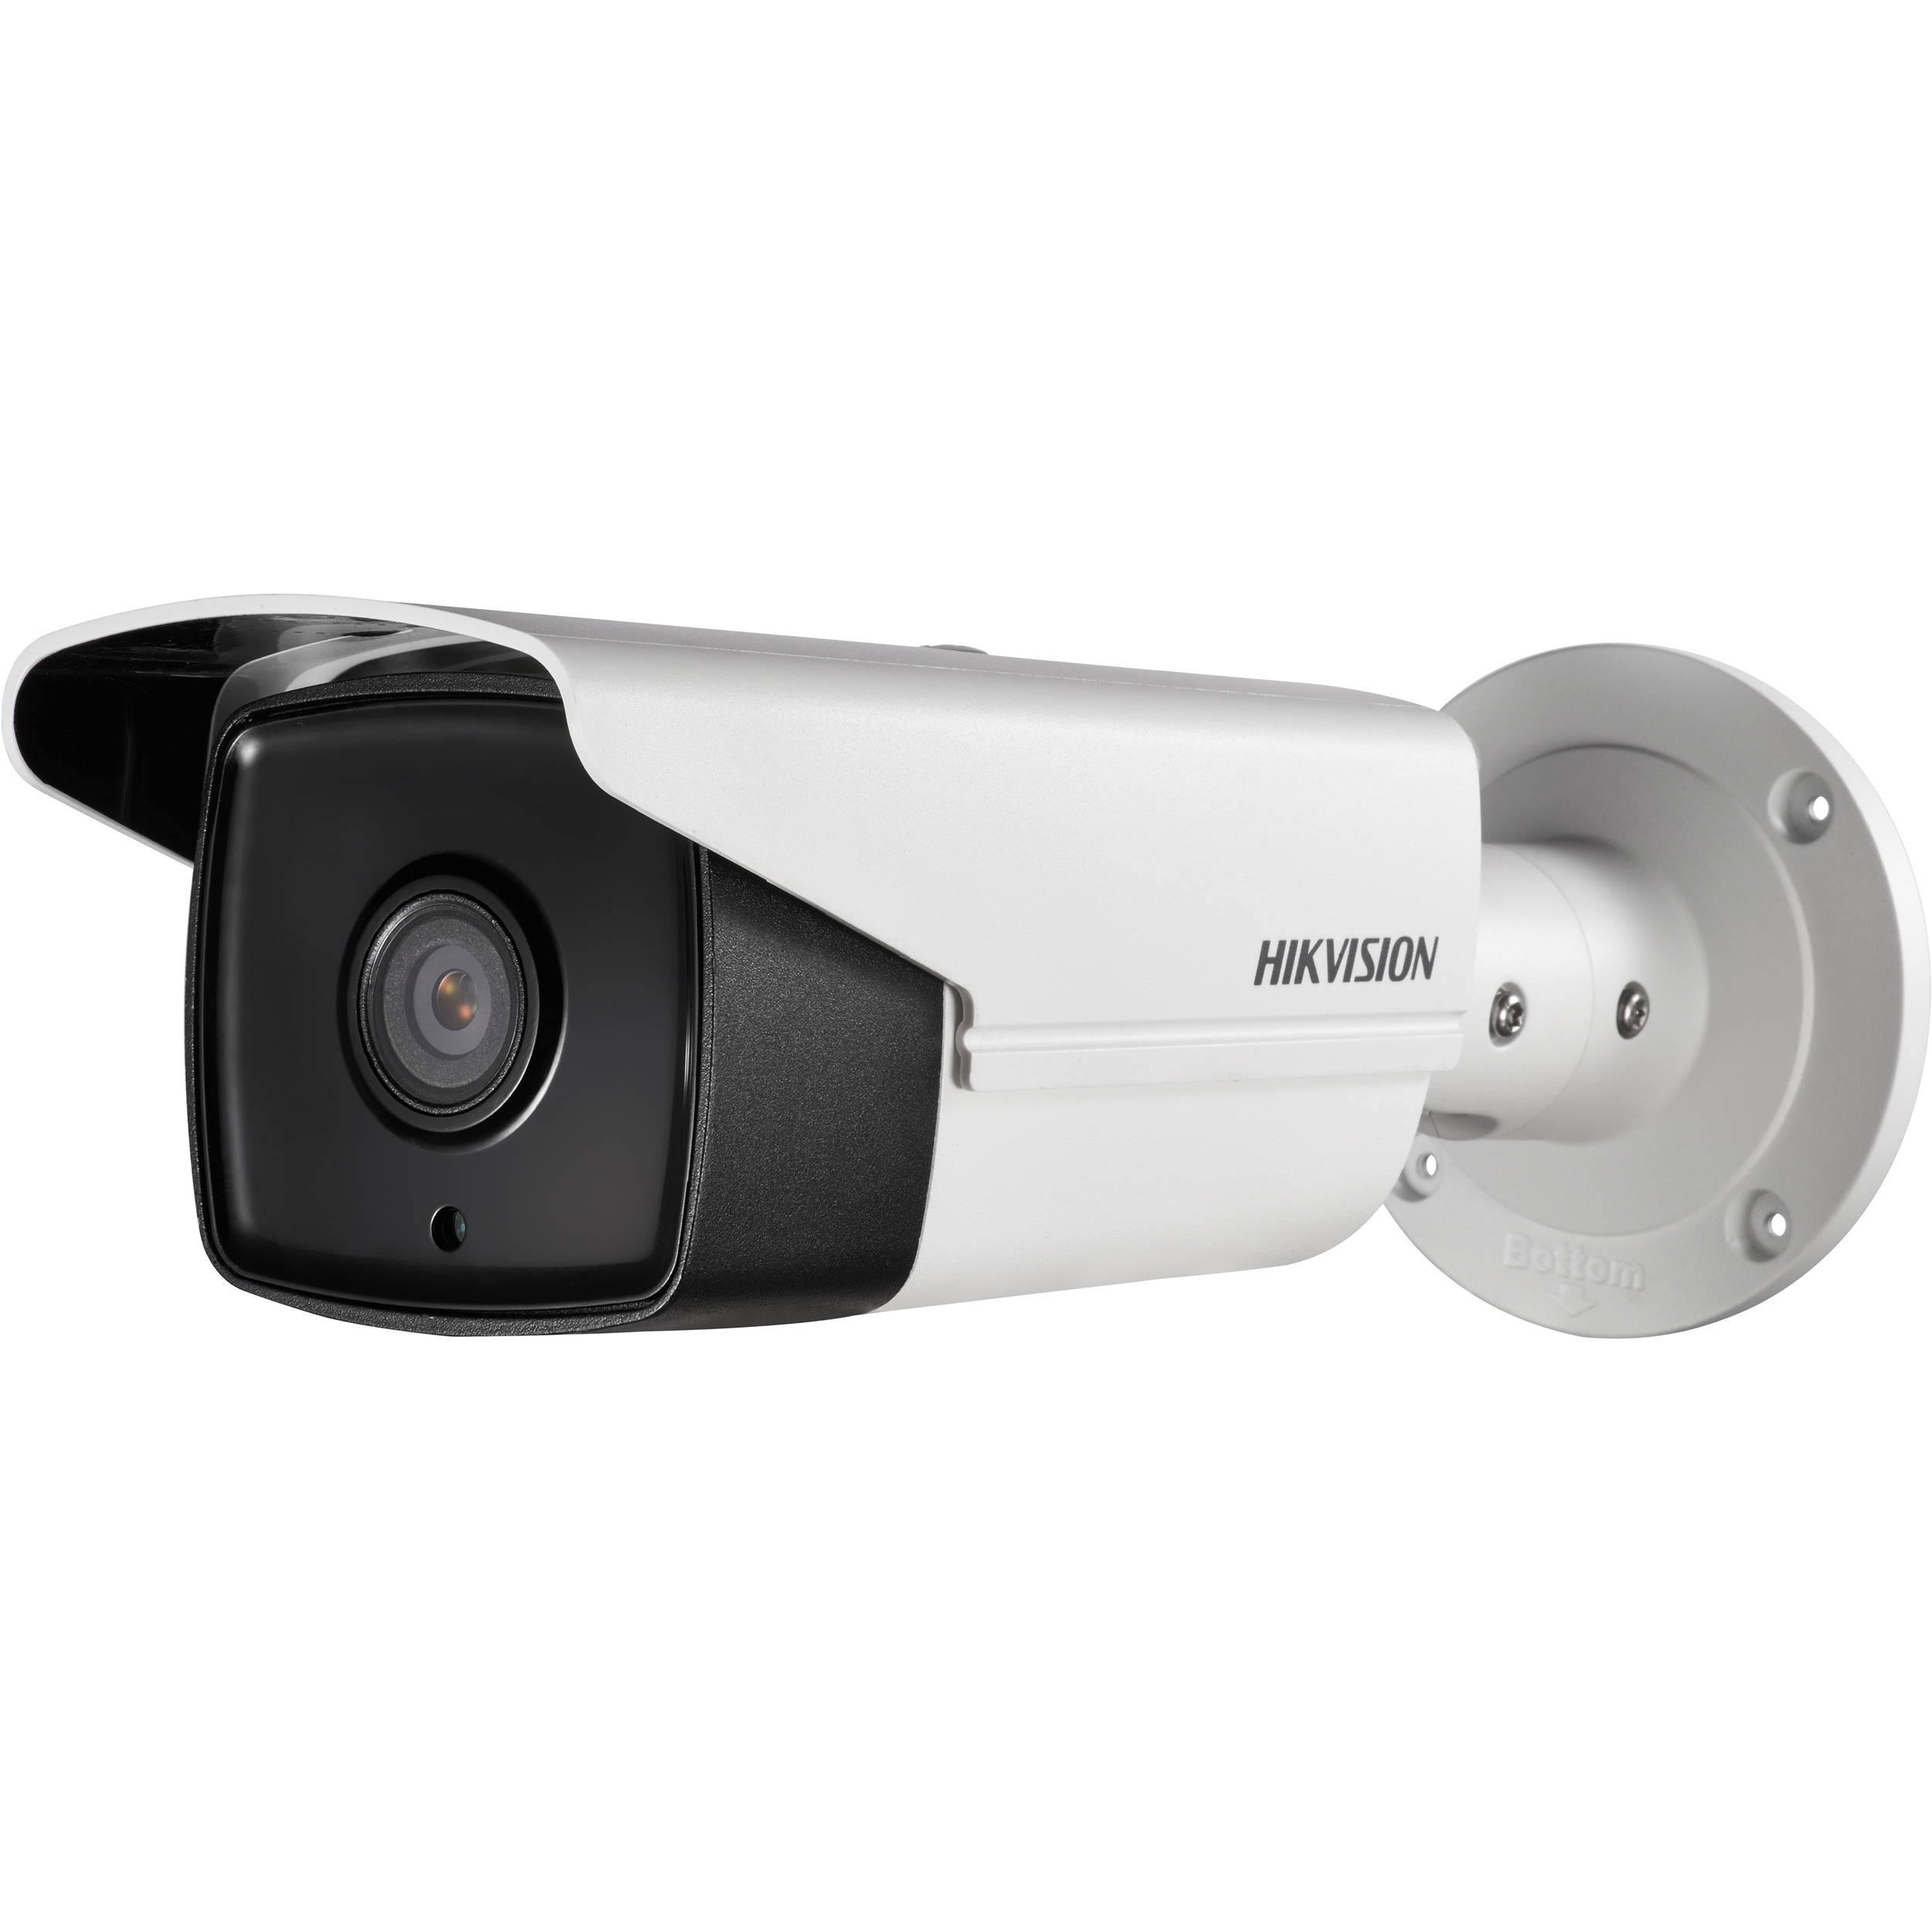 hikvision 2mp 6mm bullet camera price